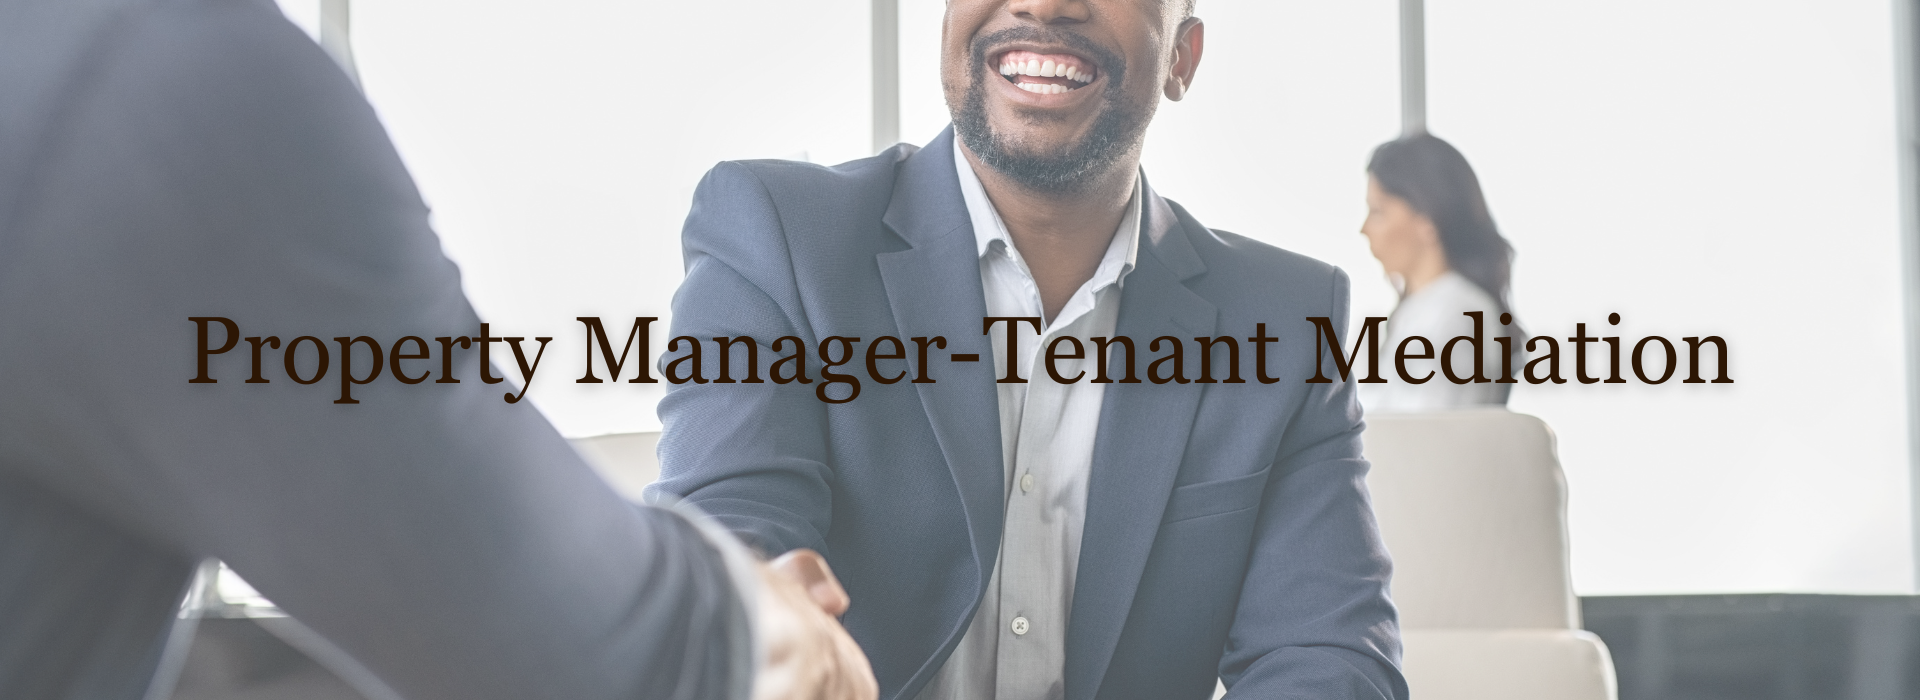 Property Manager-Tenant Mediation